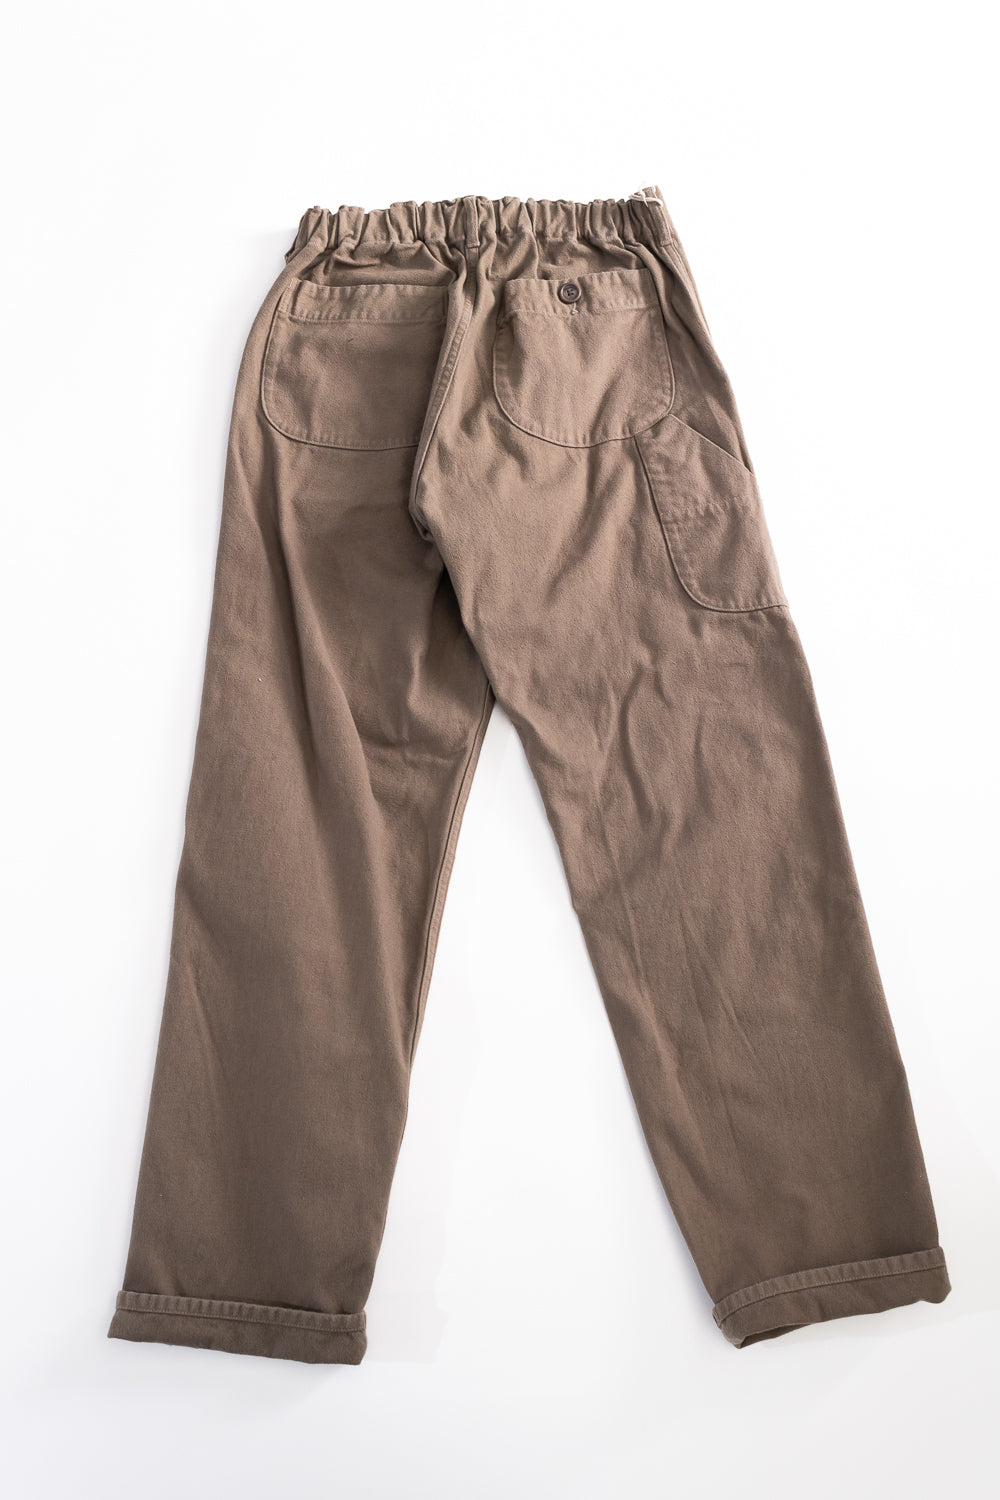 03-5000-20 - French Work Pant - Rose Gray